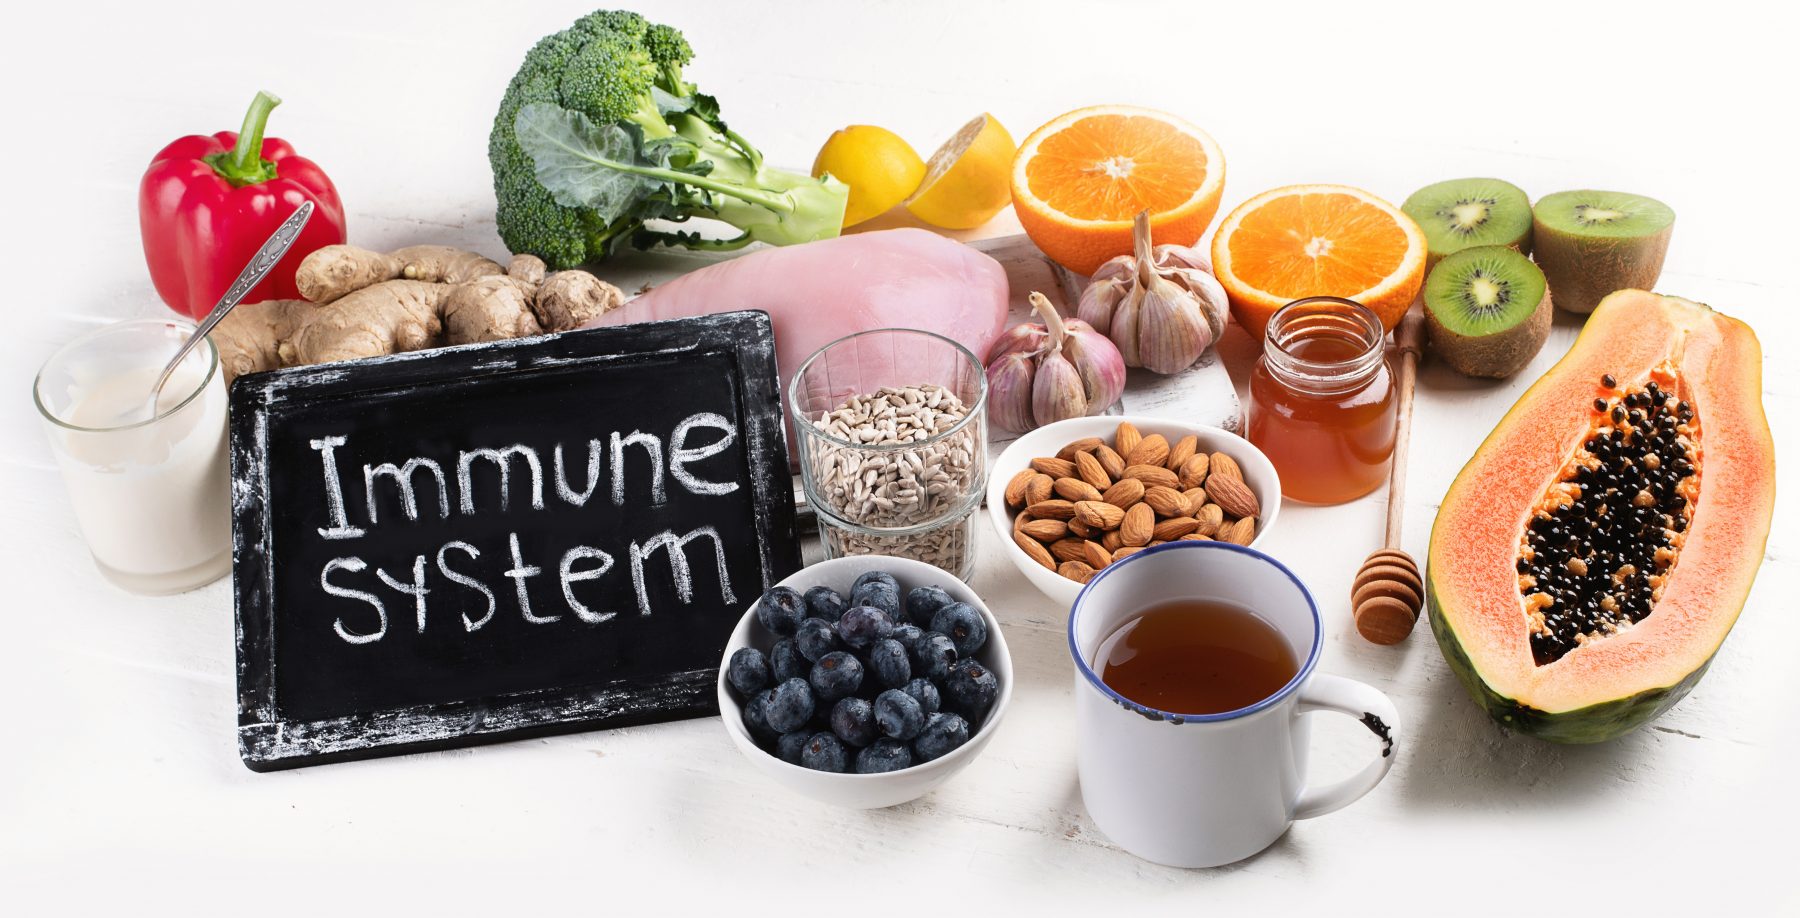 Health food surrounding chalkboard that says immune system